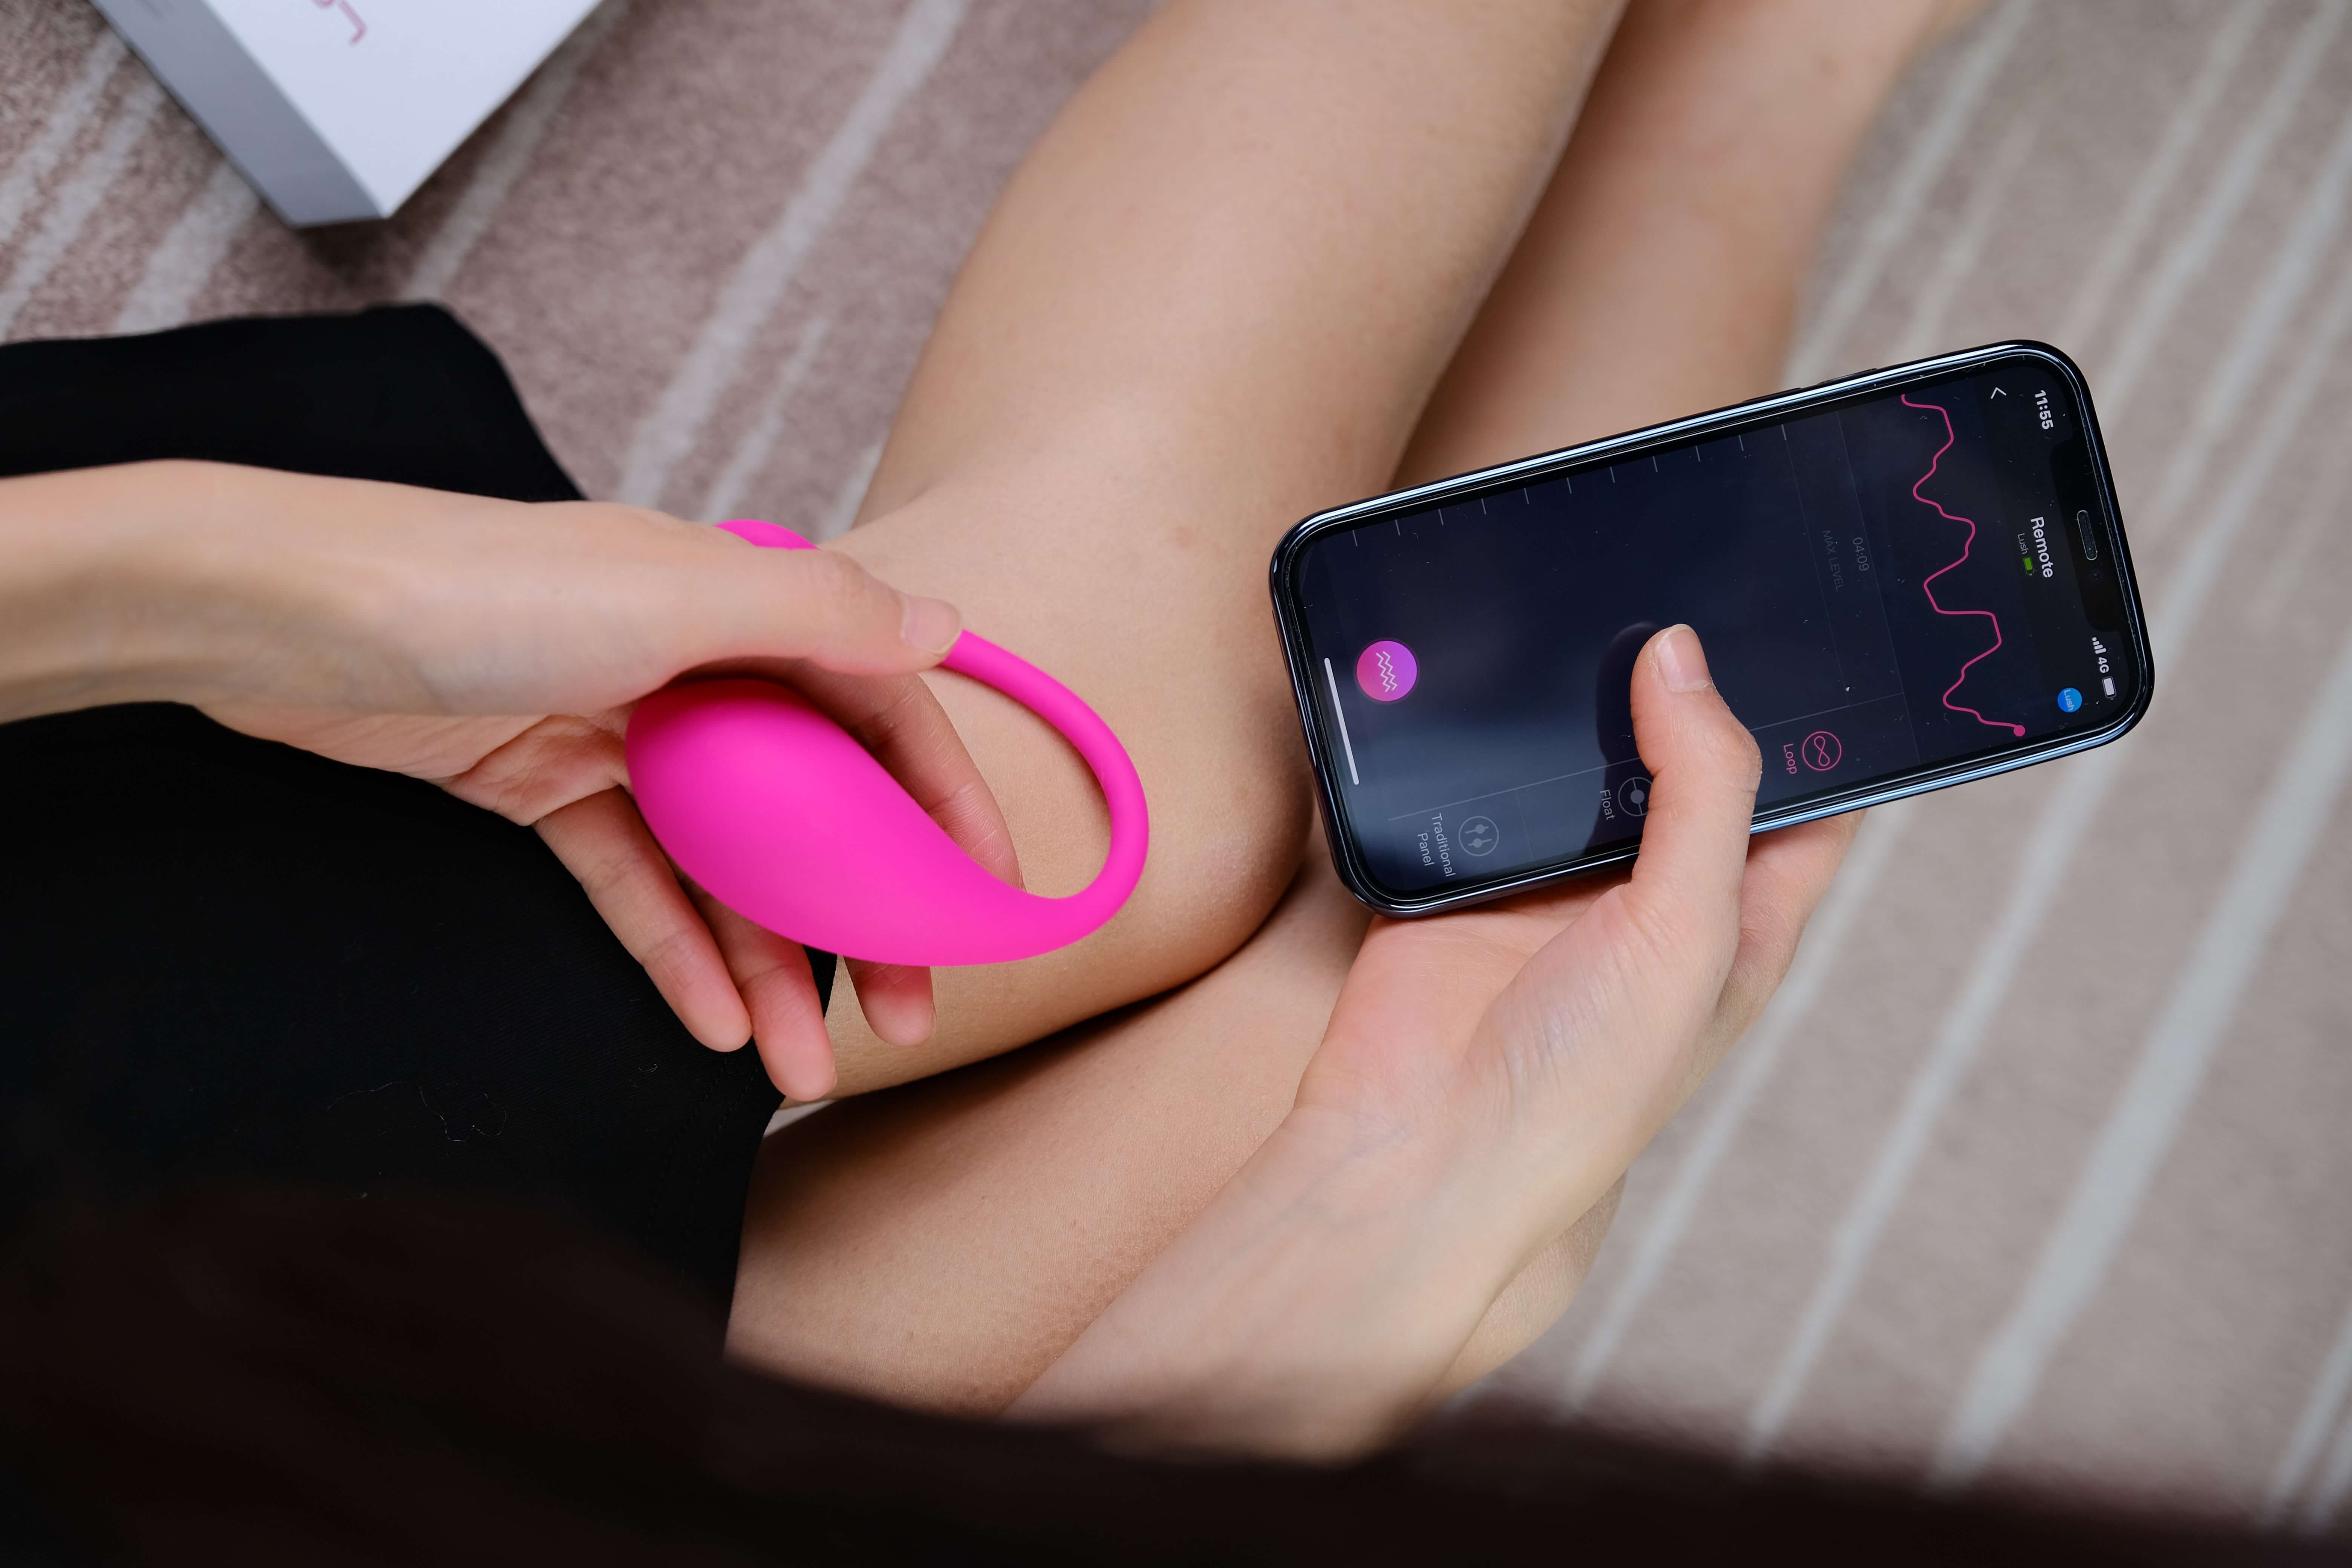 The powerful egg vibrator Lush 3 by Lovense - Product image